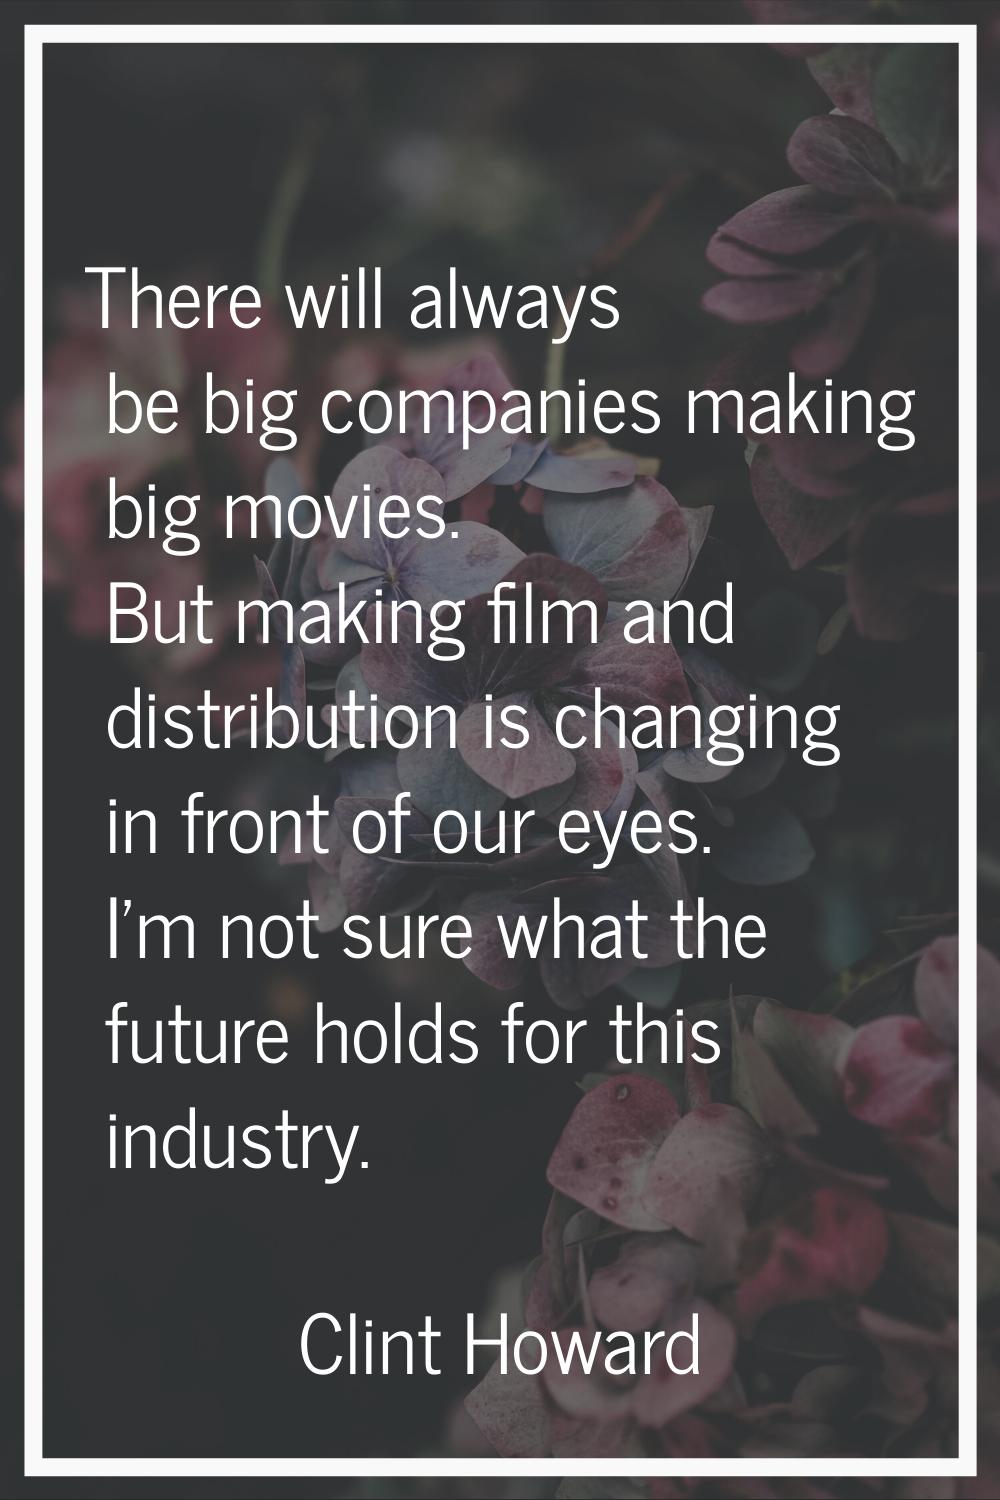 There will always be big companies making big movies. But making film and distribution is changing 